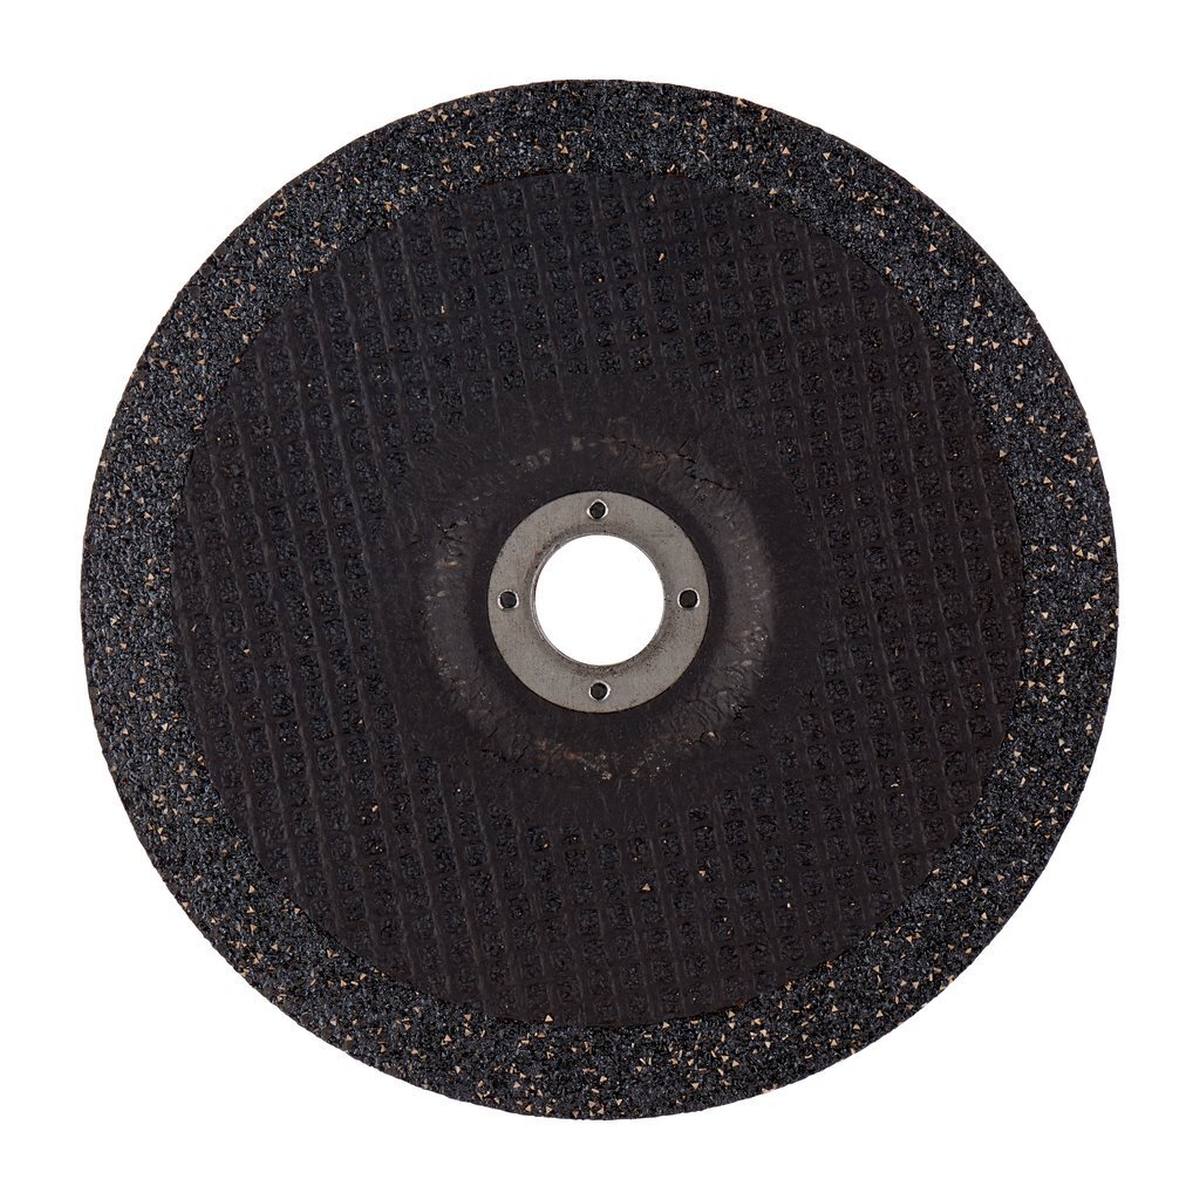 3M Silver grinding disc, 180 mm, 7.0 mm, 22.23 mm, type 27